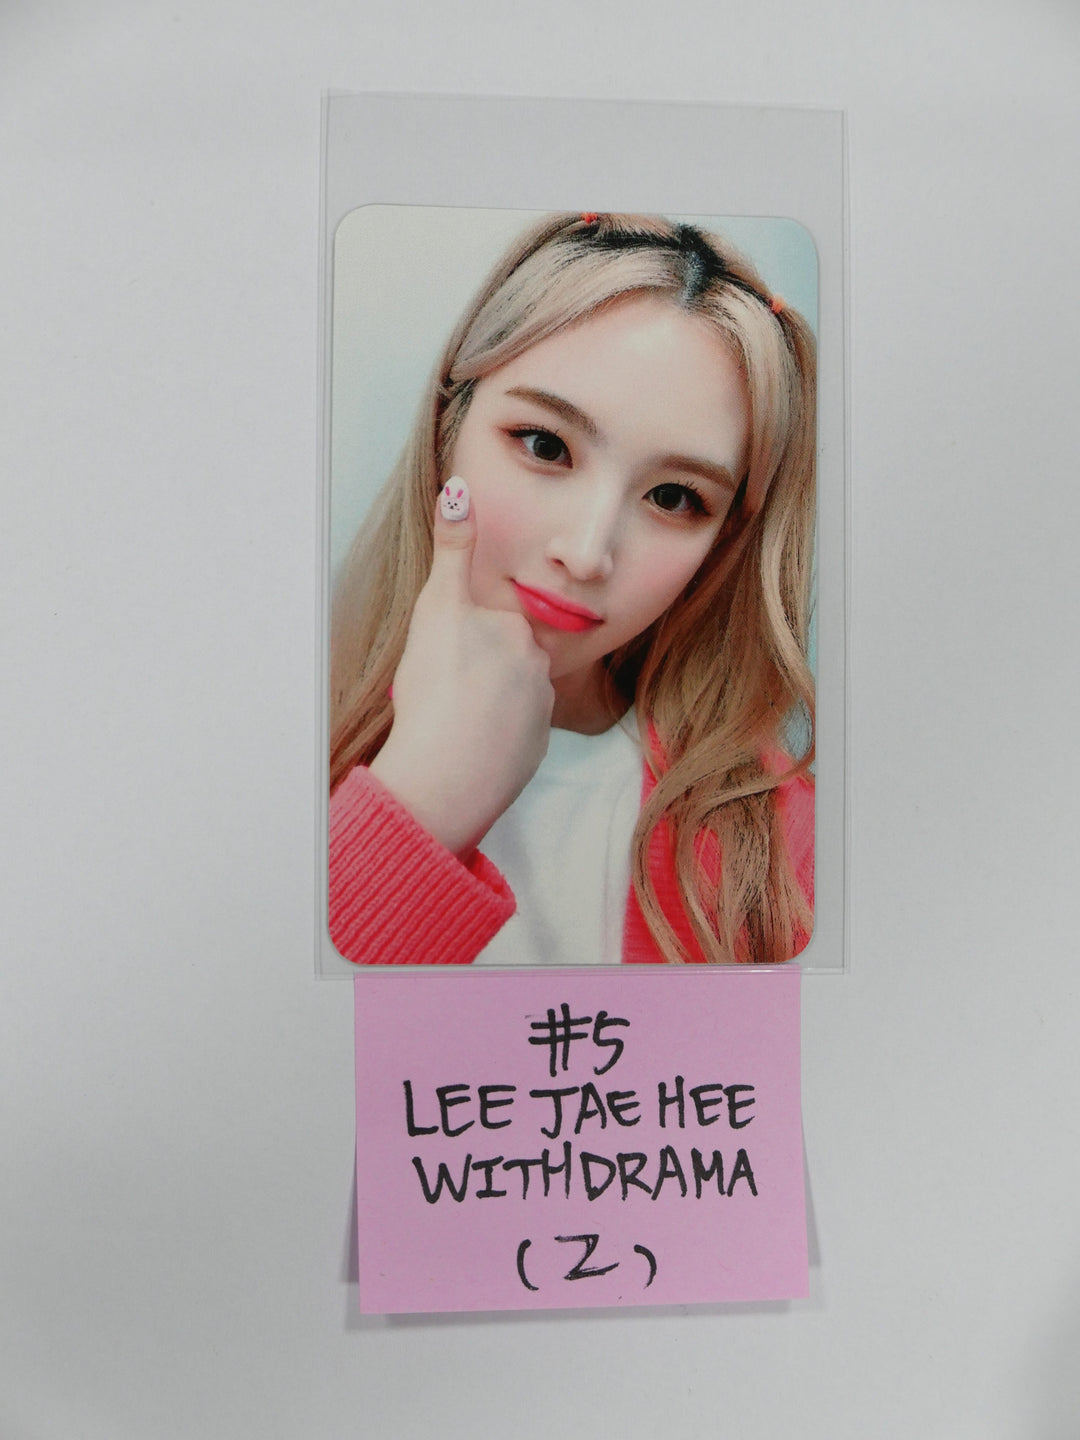 Weeekly "Holiday Party" 4th Mini- Withdrama event Fansign Event Photocard